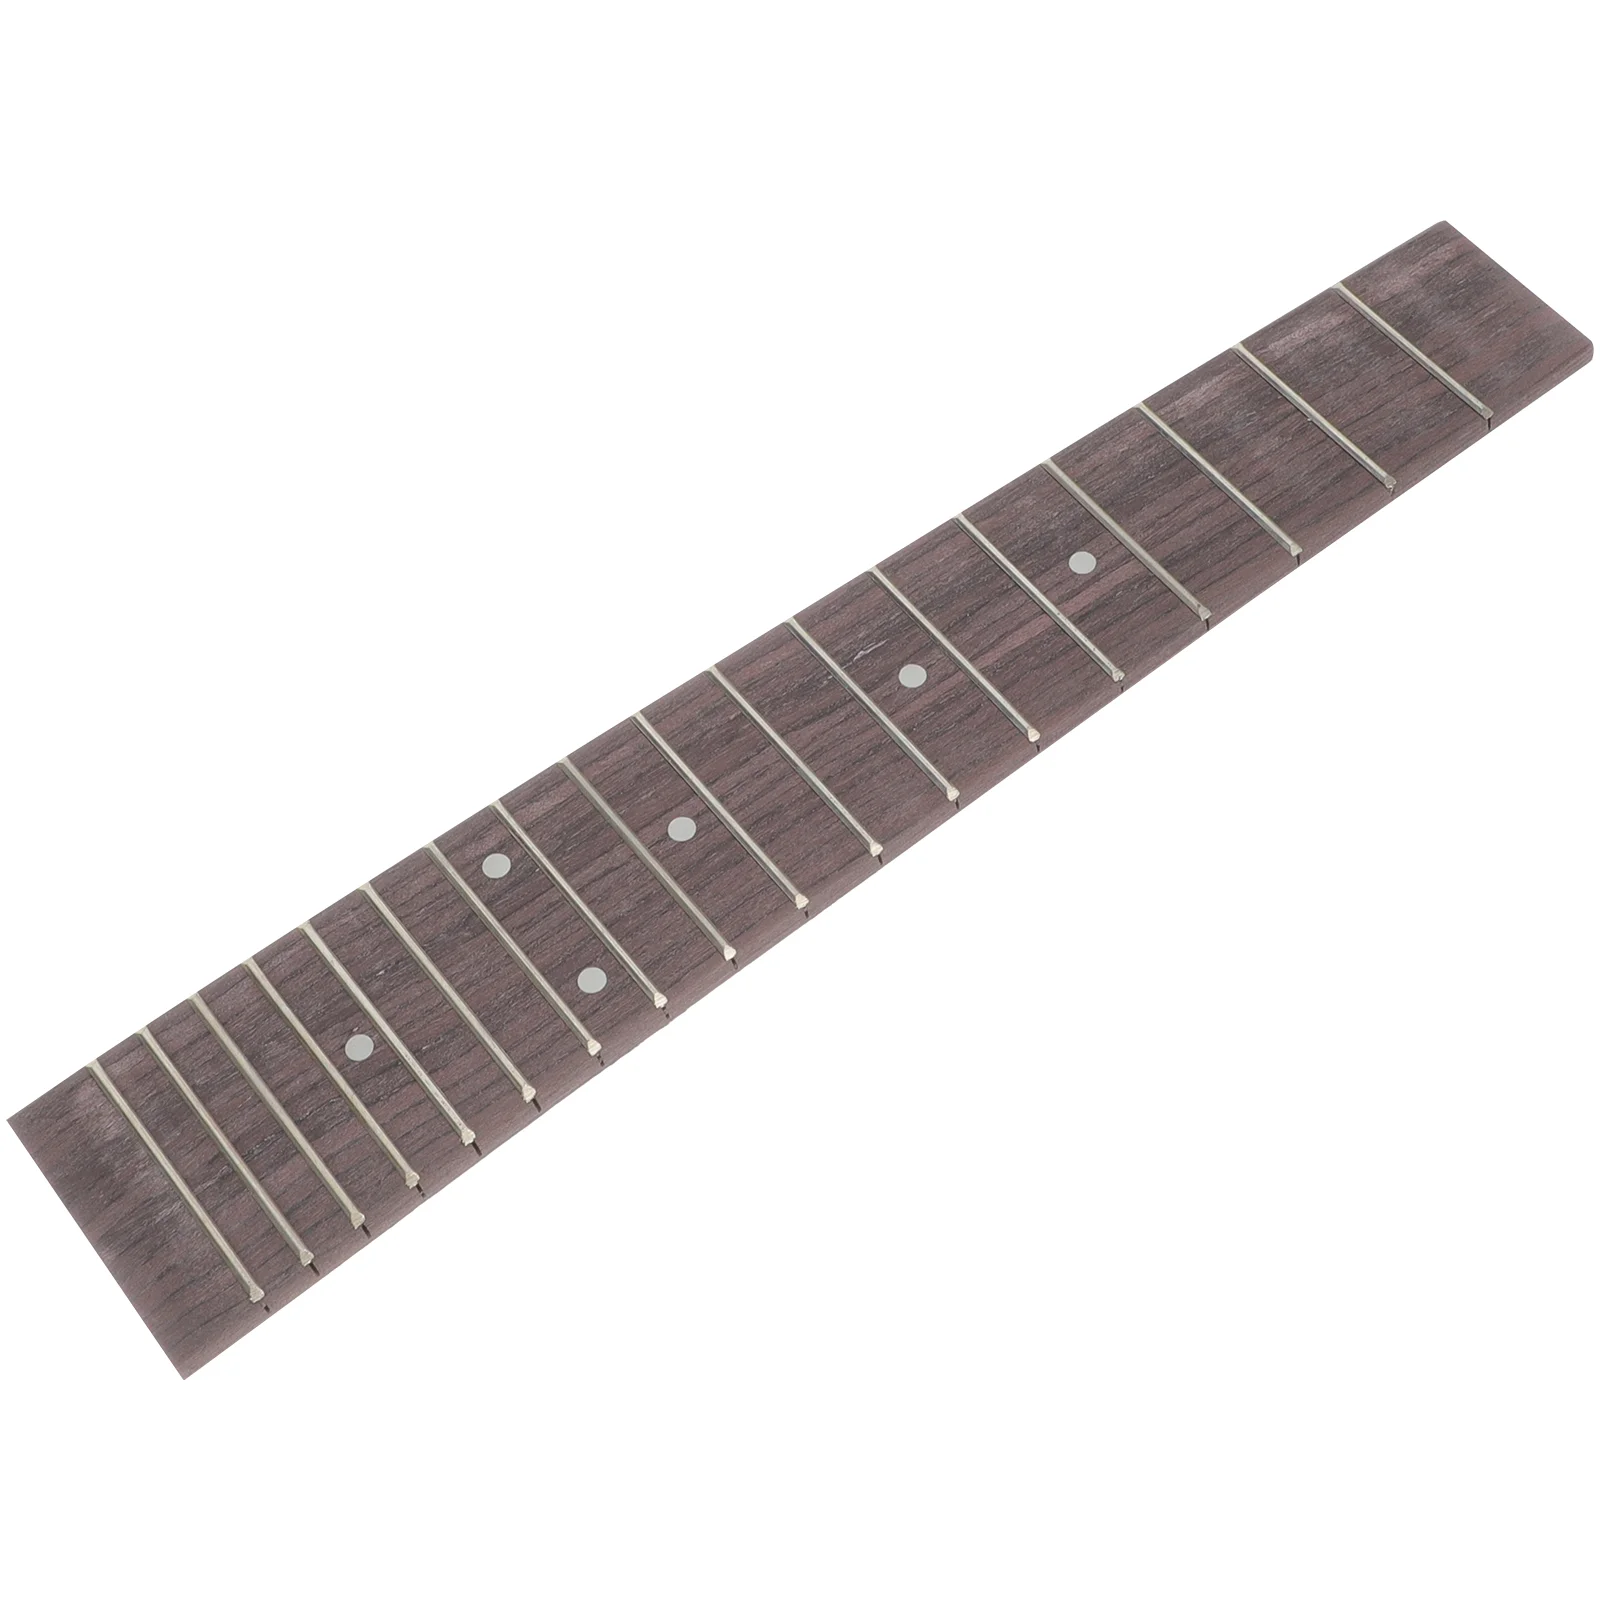 

Fingerboard 23 Inch Uk Guitar Fret Accessory Portable Plate Ukulele Fretboards Replacement Parts Wood